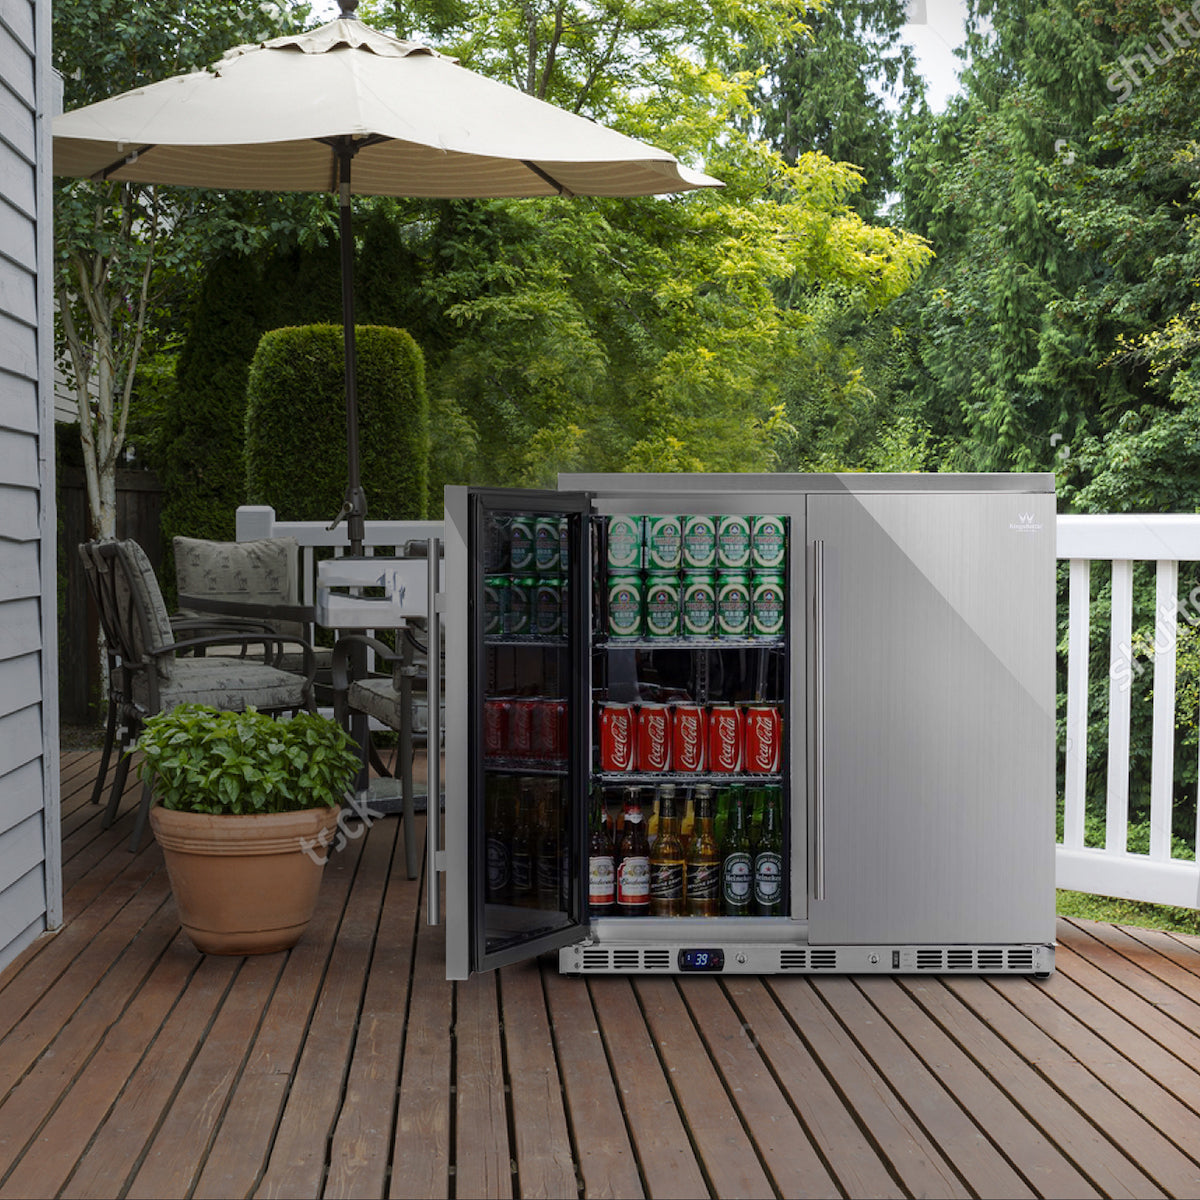 A Kings Bottle 36" Outdoor Beverage Refrigerator with two doors, perfect for cooling drinks on hot summer days.